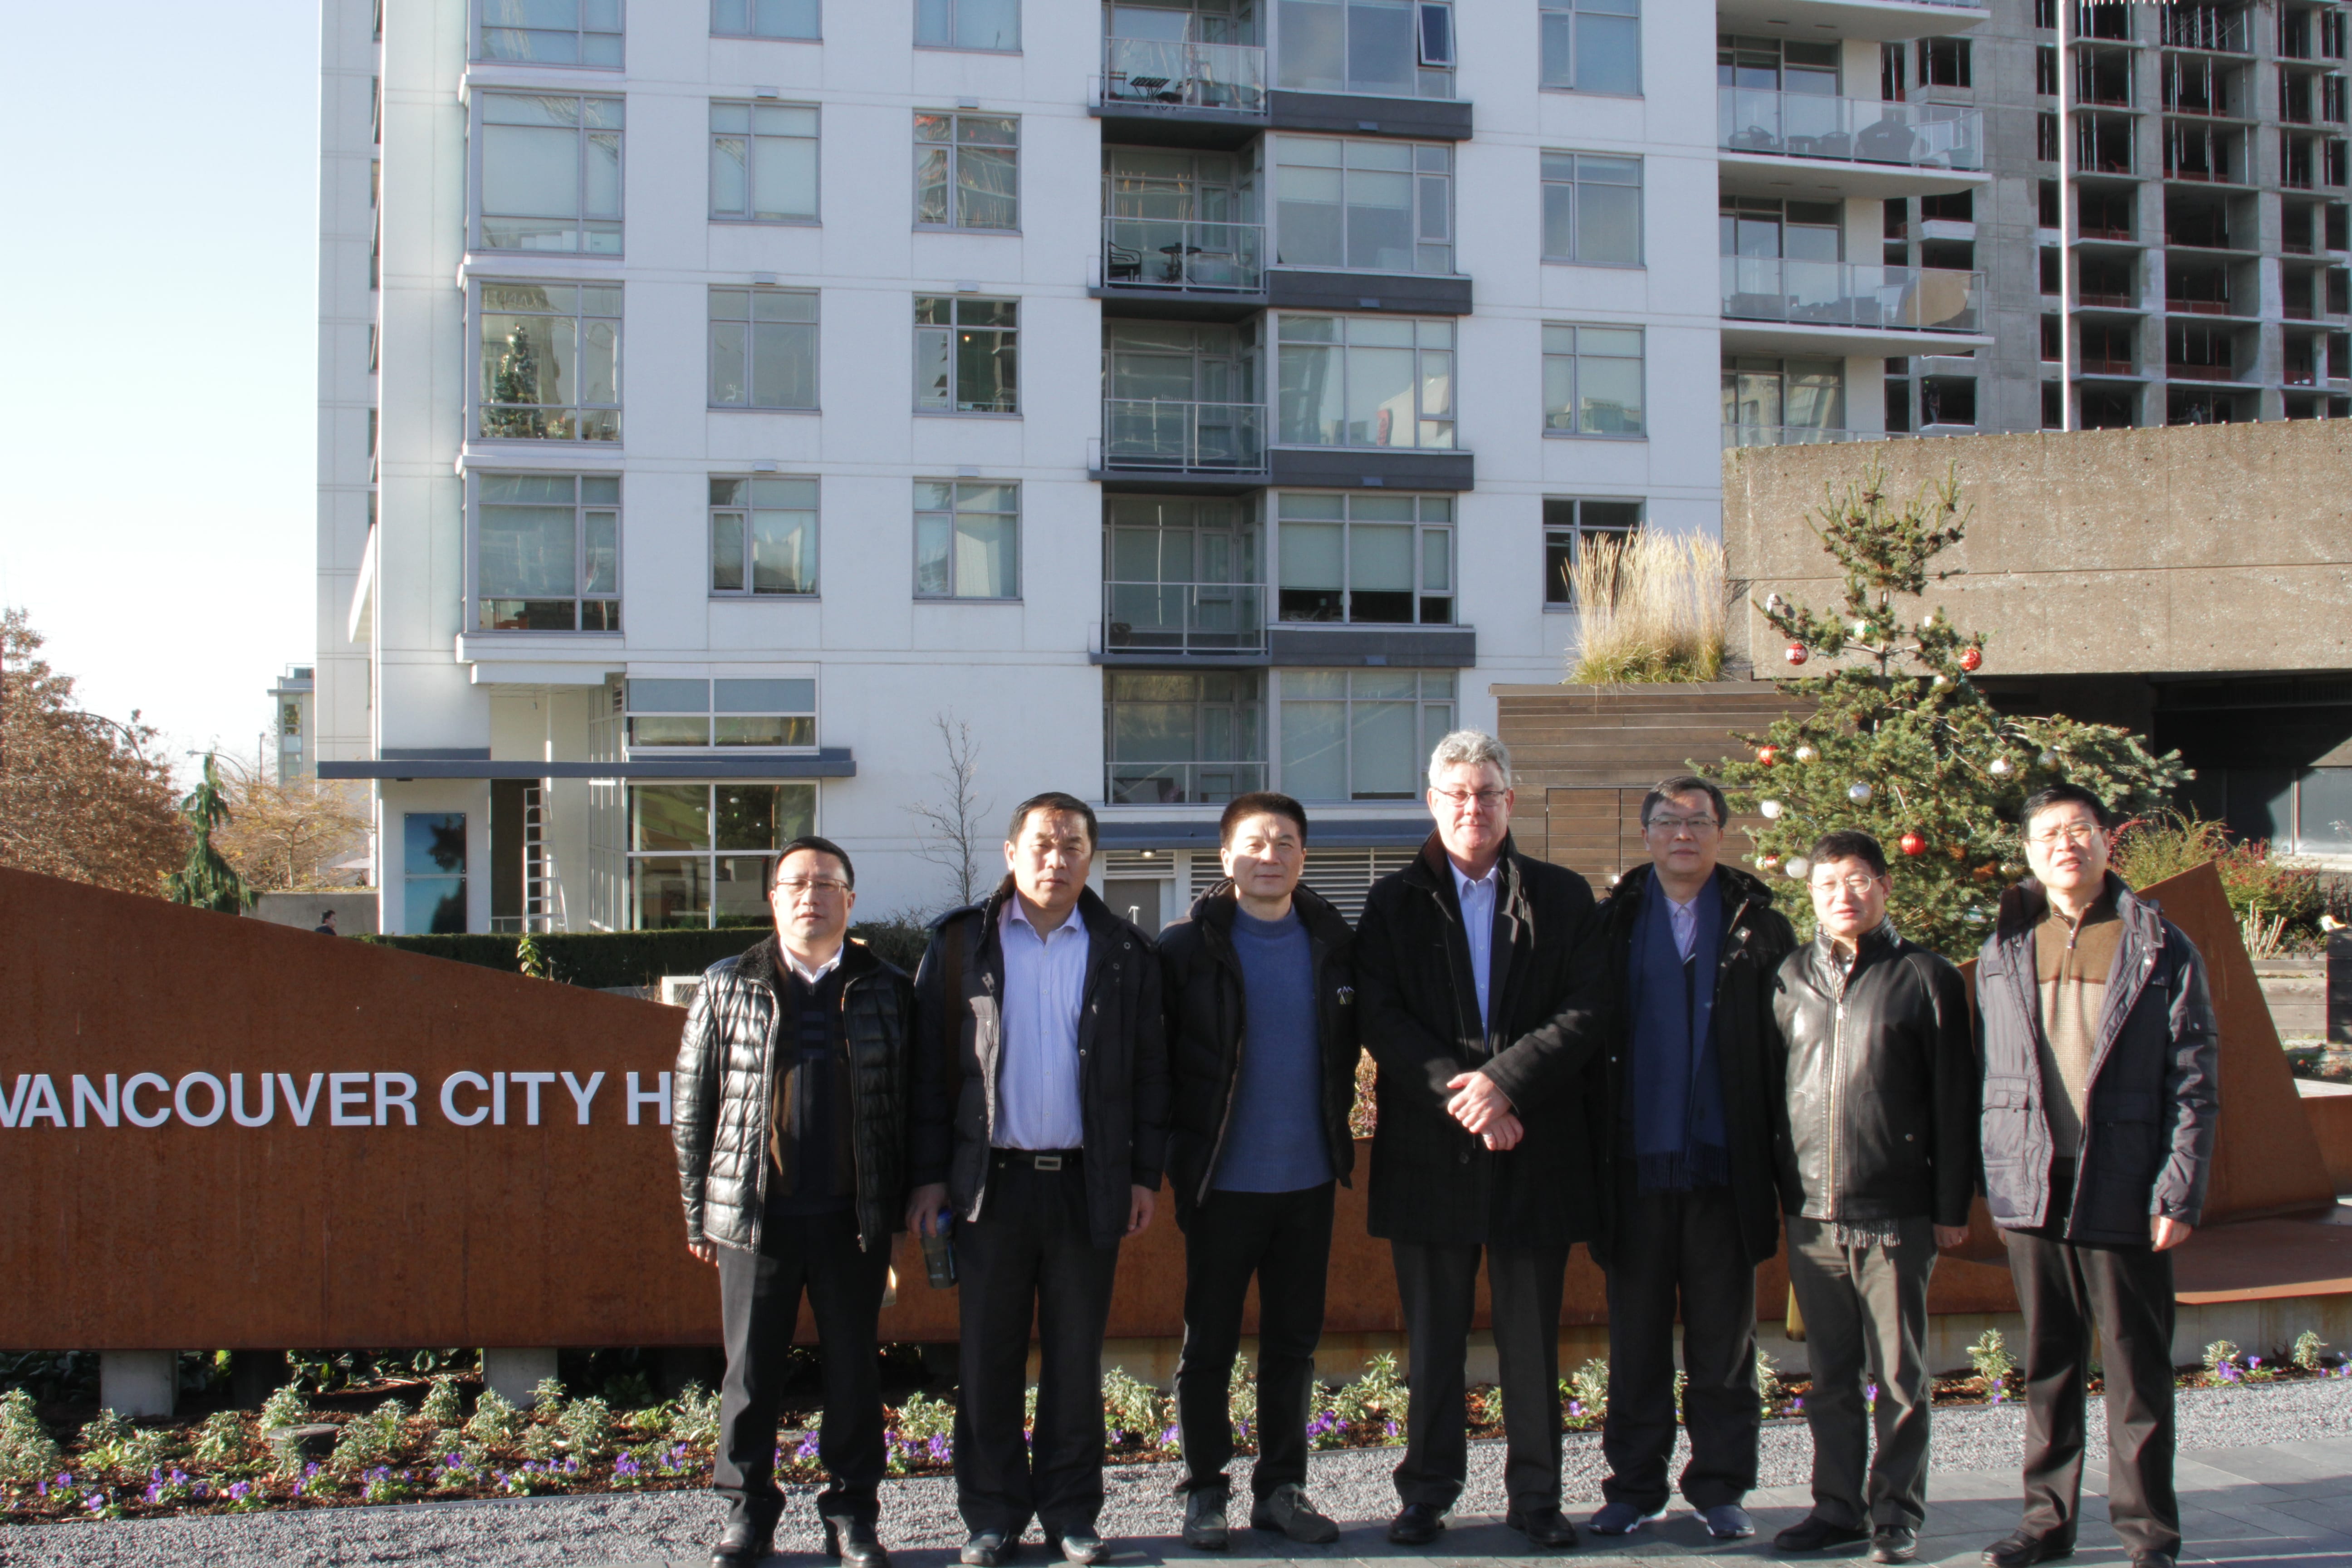 Pudong delegation expresses interest in B.C. wood products and systems during visit